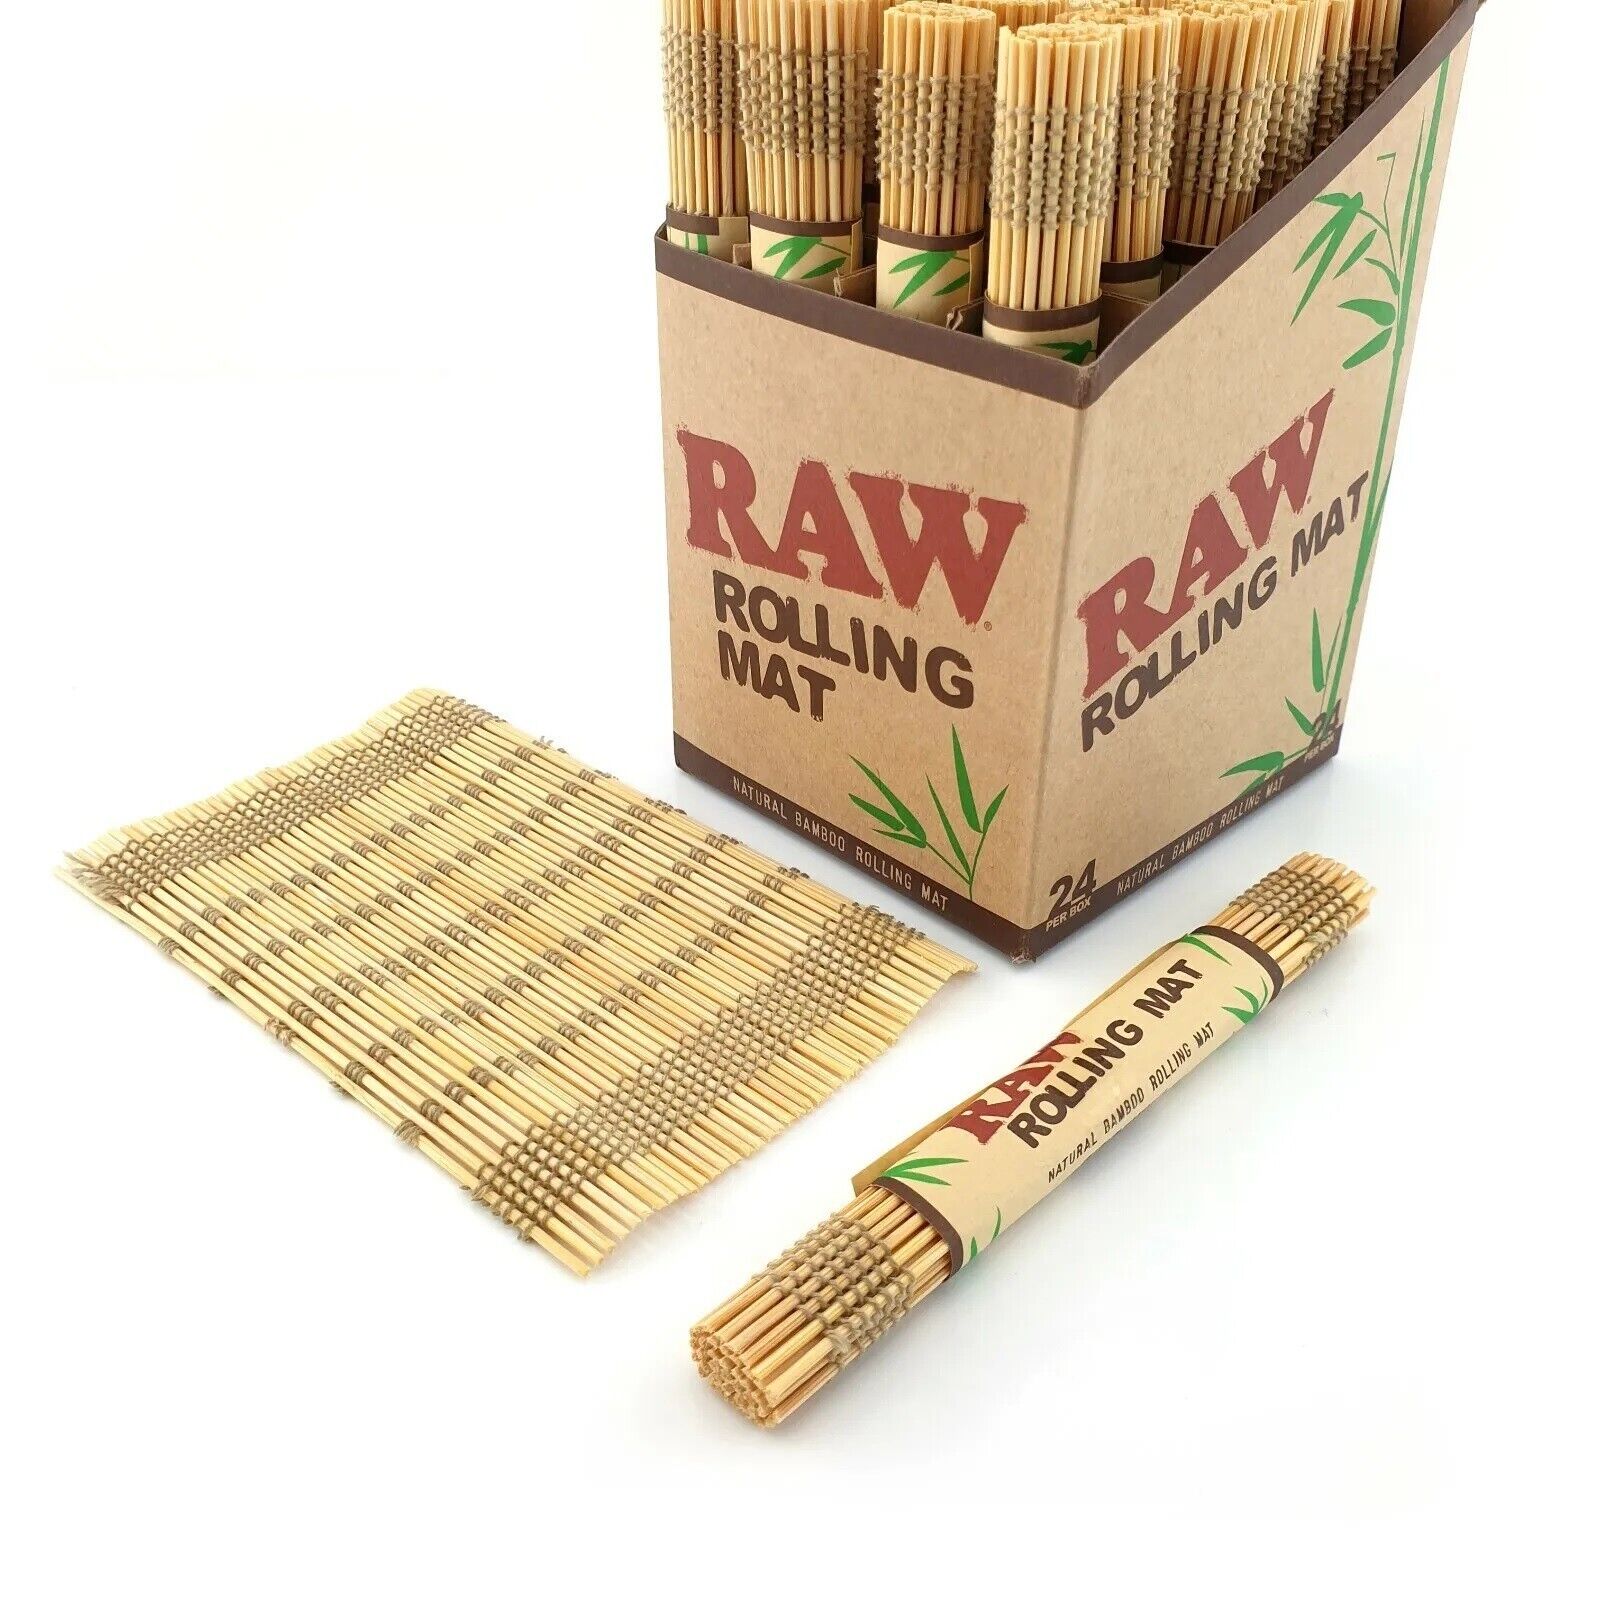 RAW BAMBOO ROLLING MATS Counter Top Display of 24 